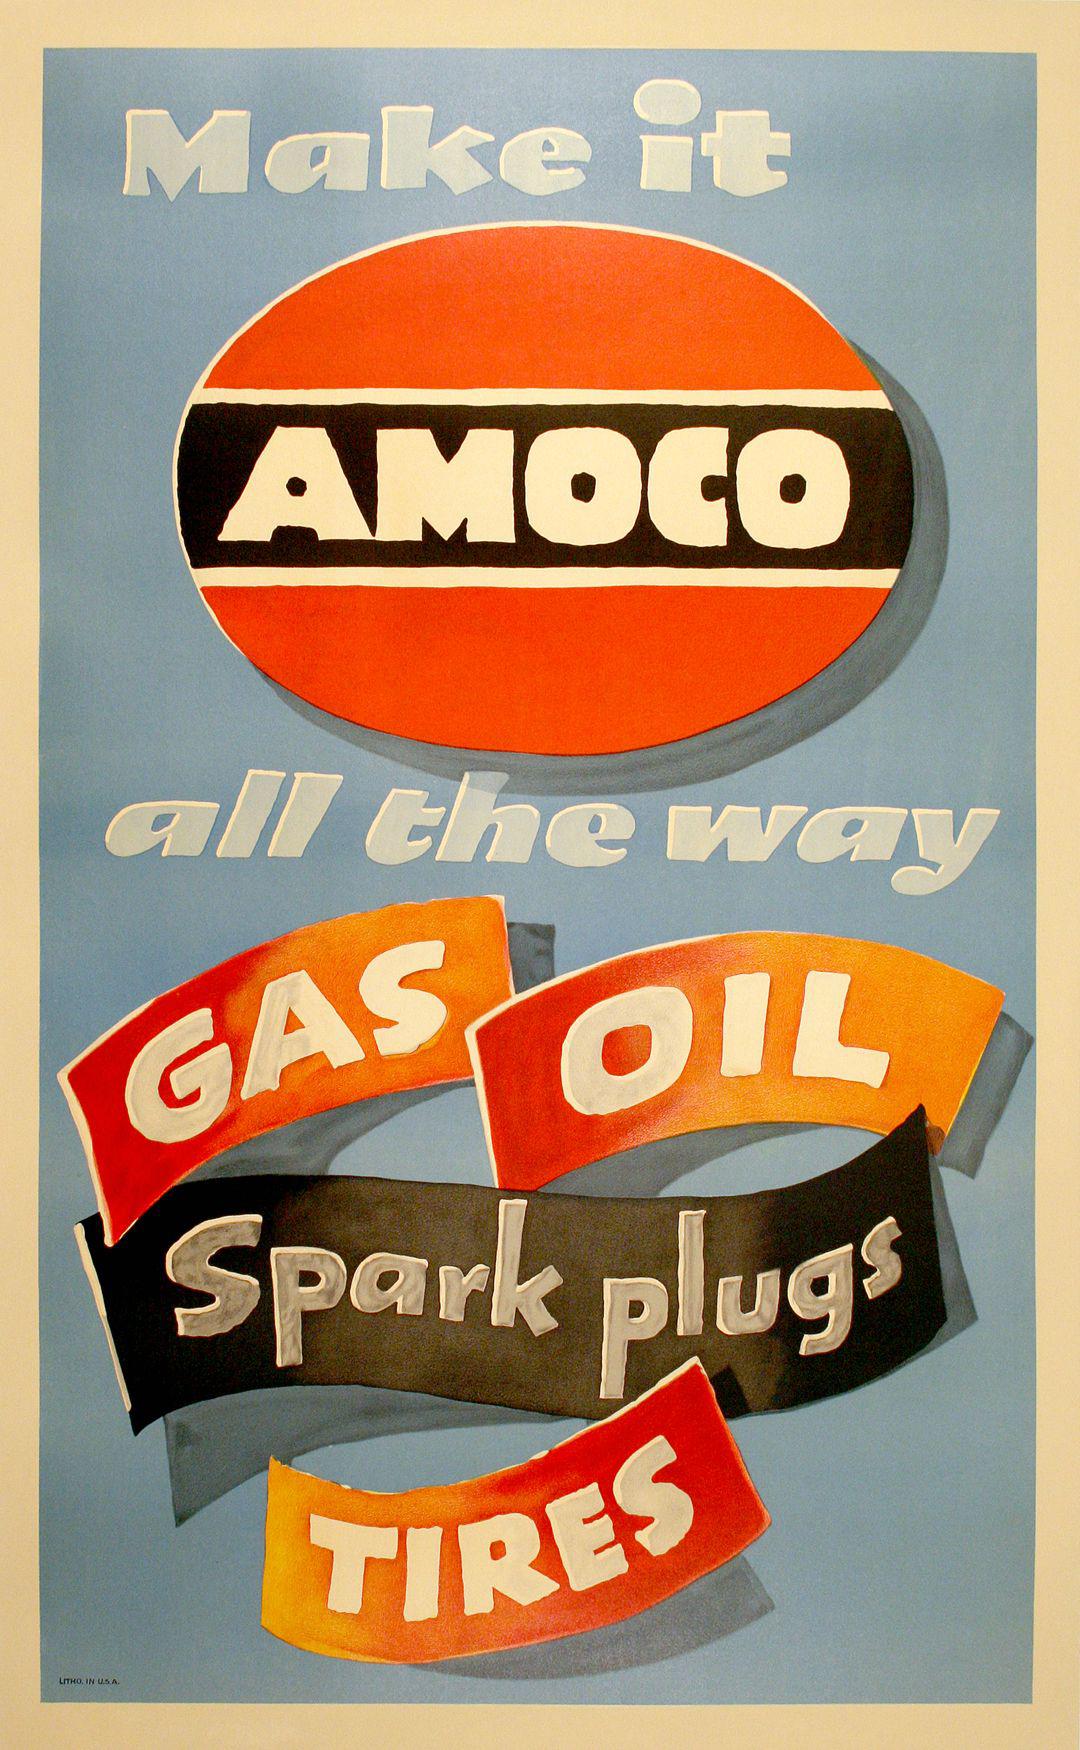 Original 1950's Lucian Bernhard Poster for Amoco - Make It Amoco all The Way